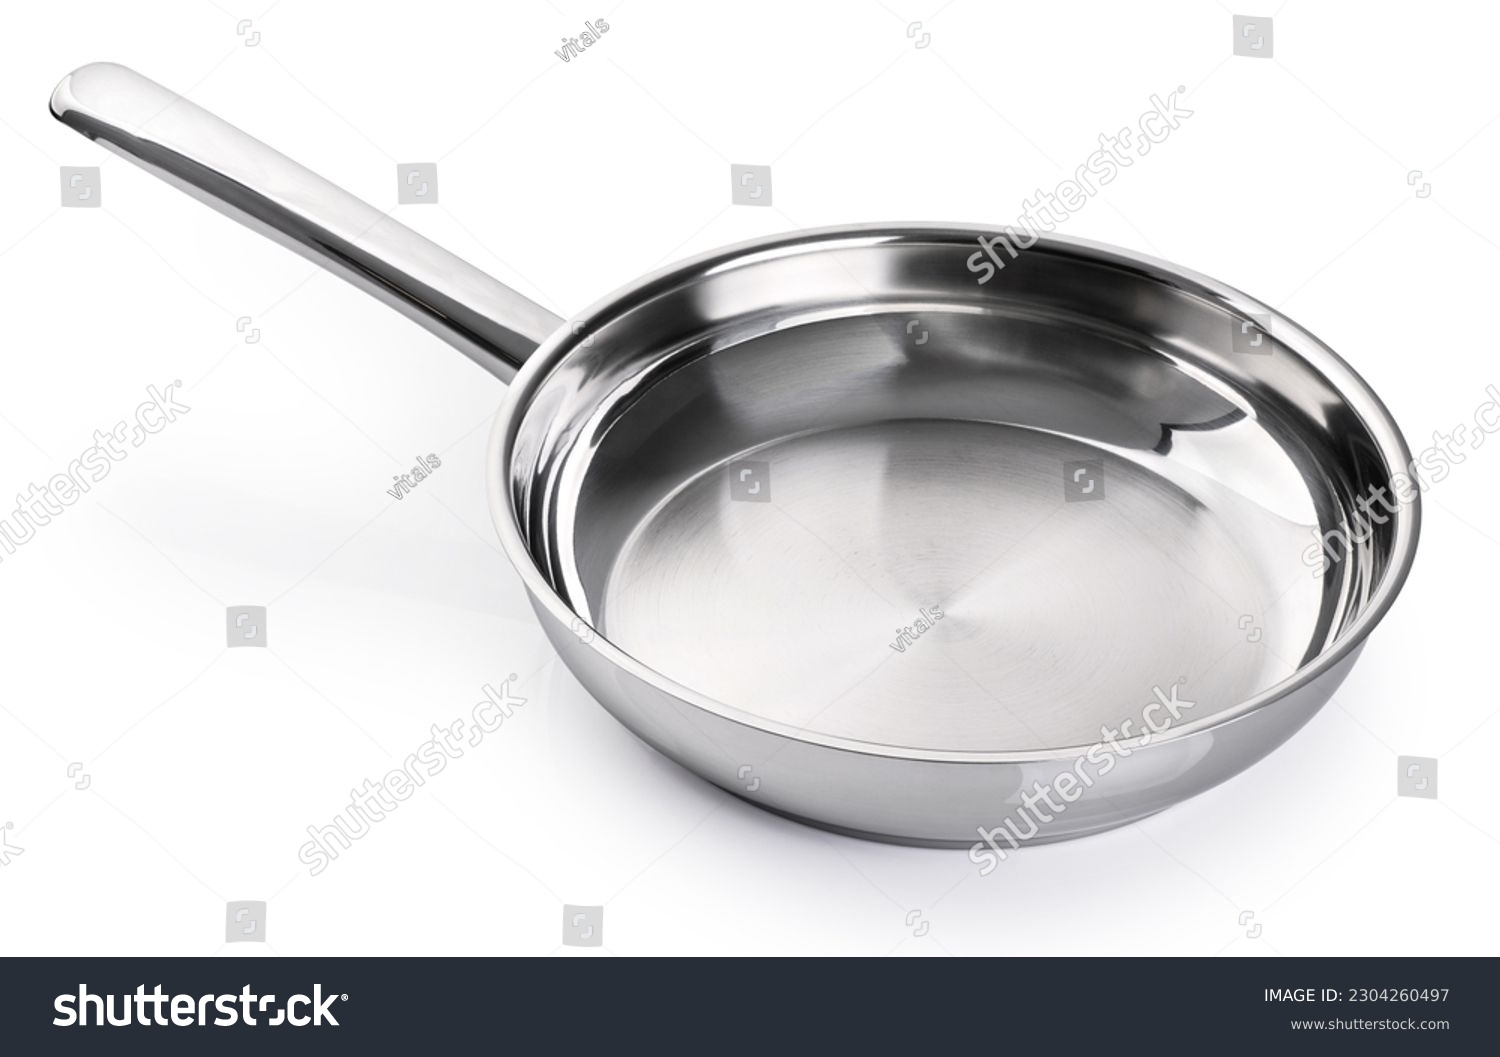 Stainless steel frying pan isolated on white background. With clipping path. #2304260497